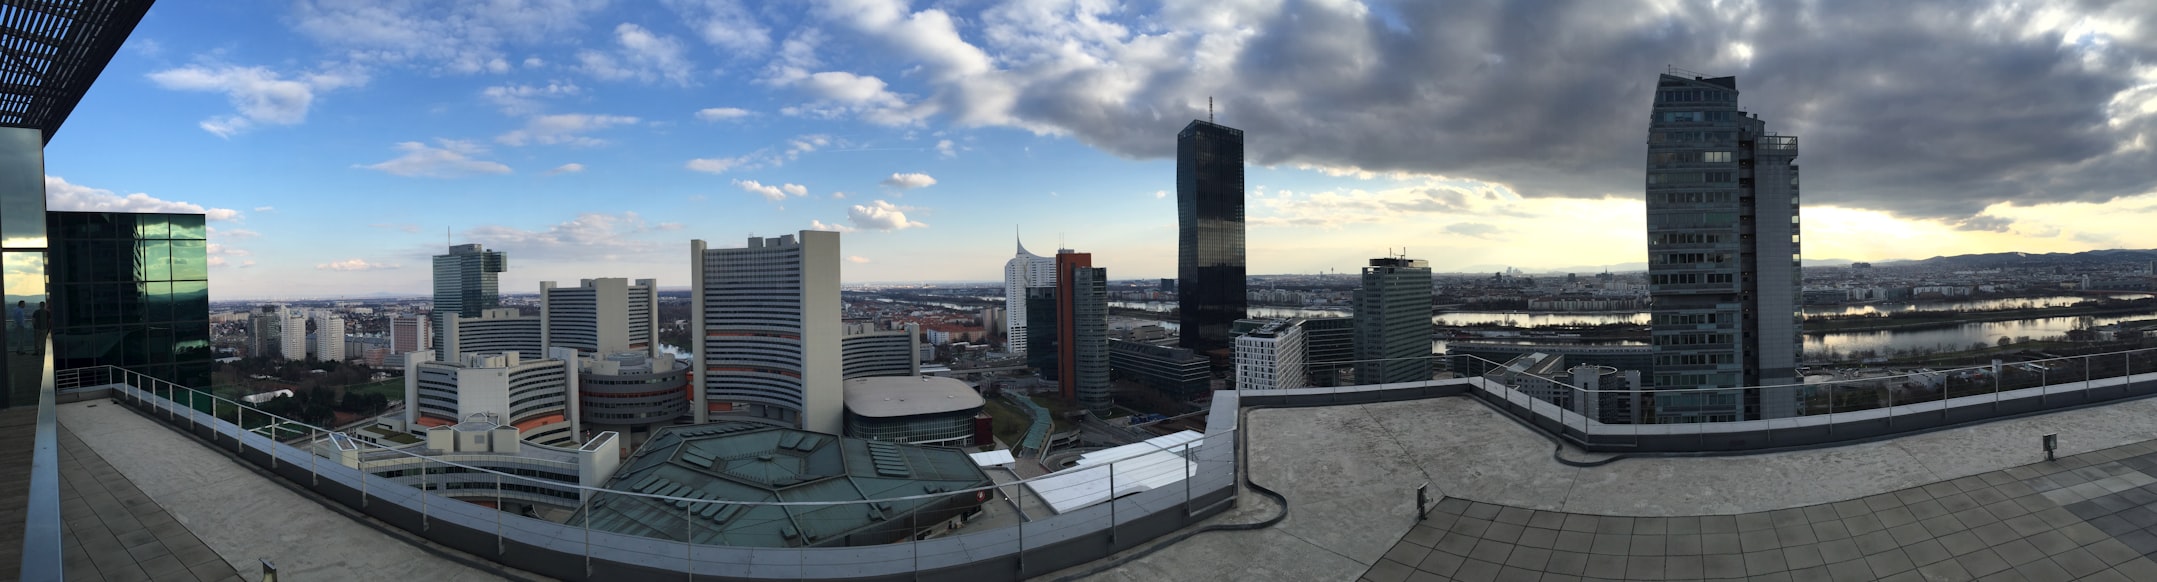 Background picture showing skyscrapers in Vienna